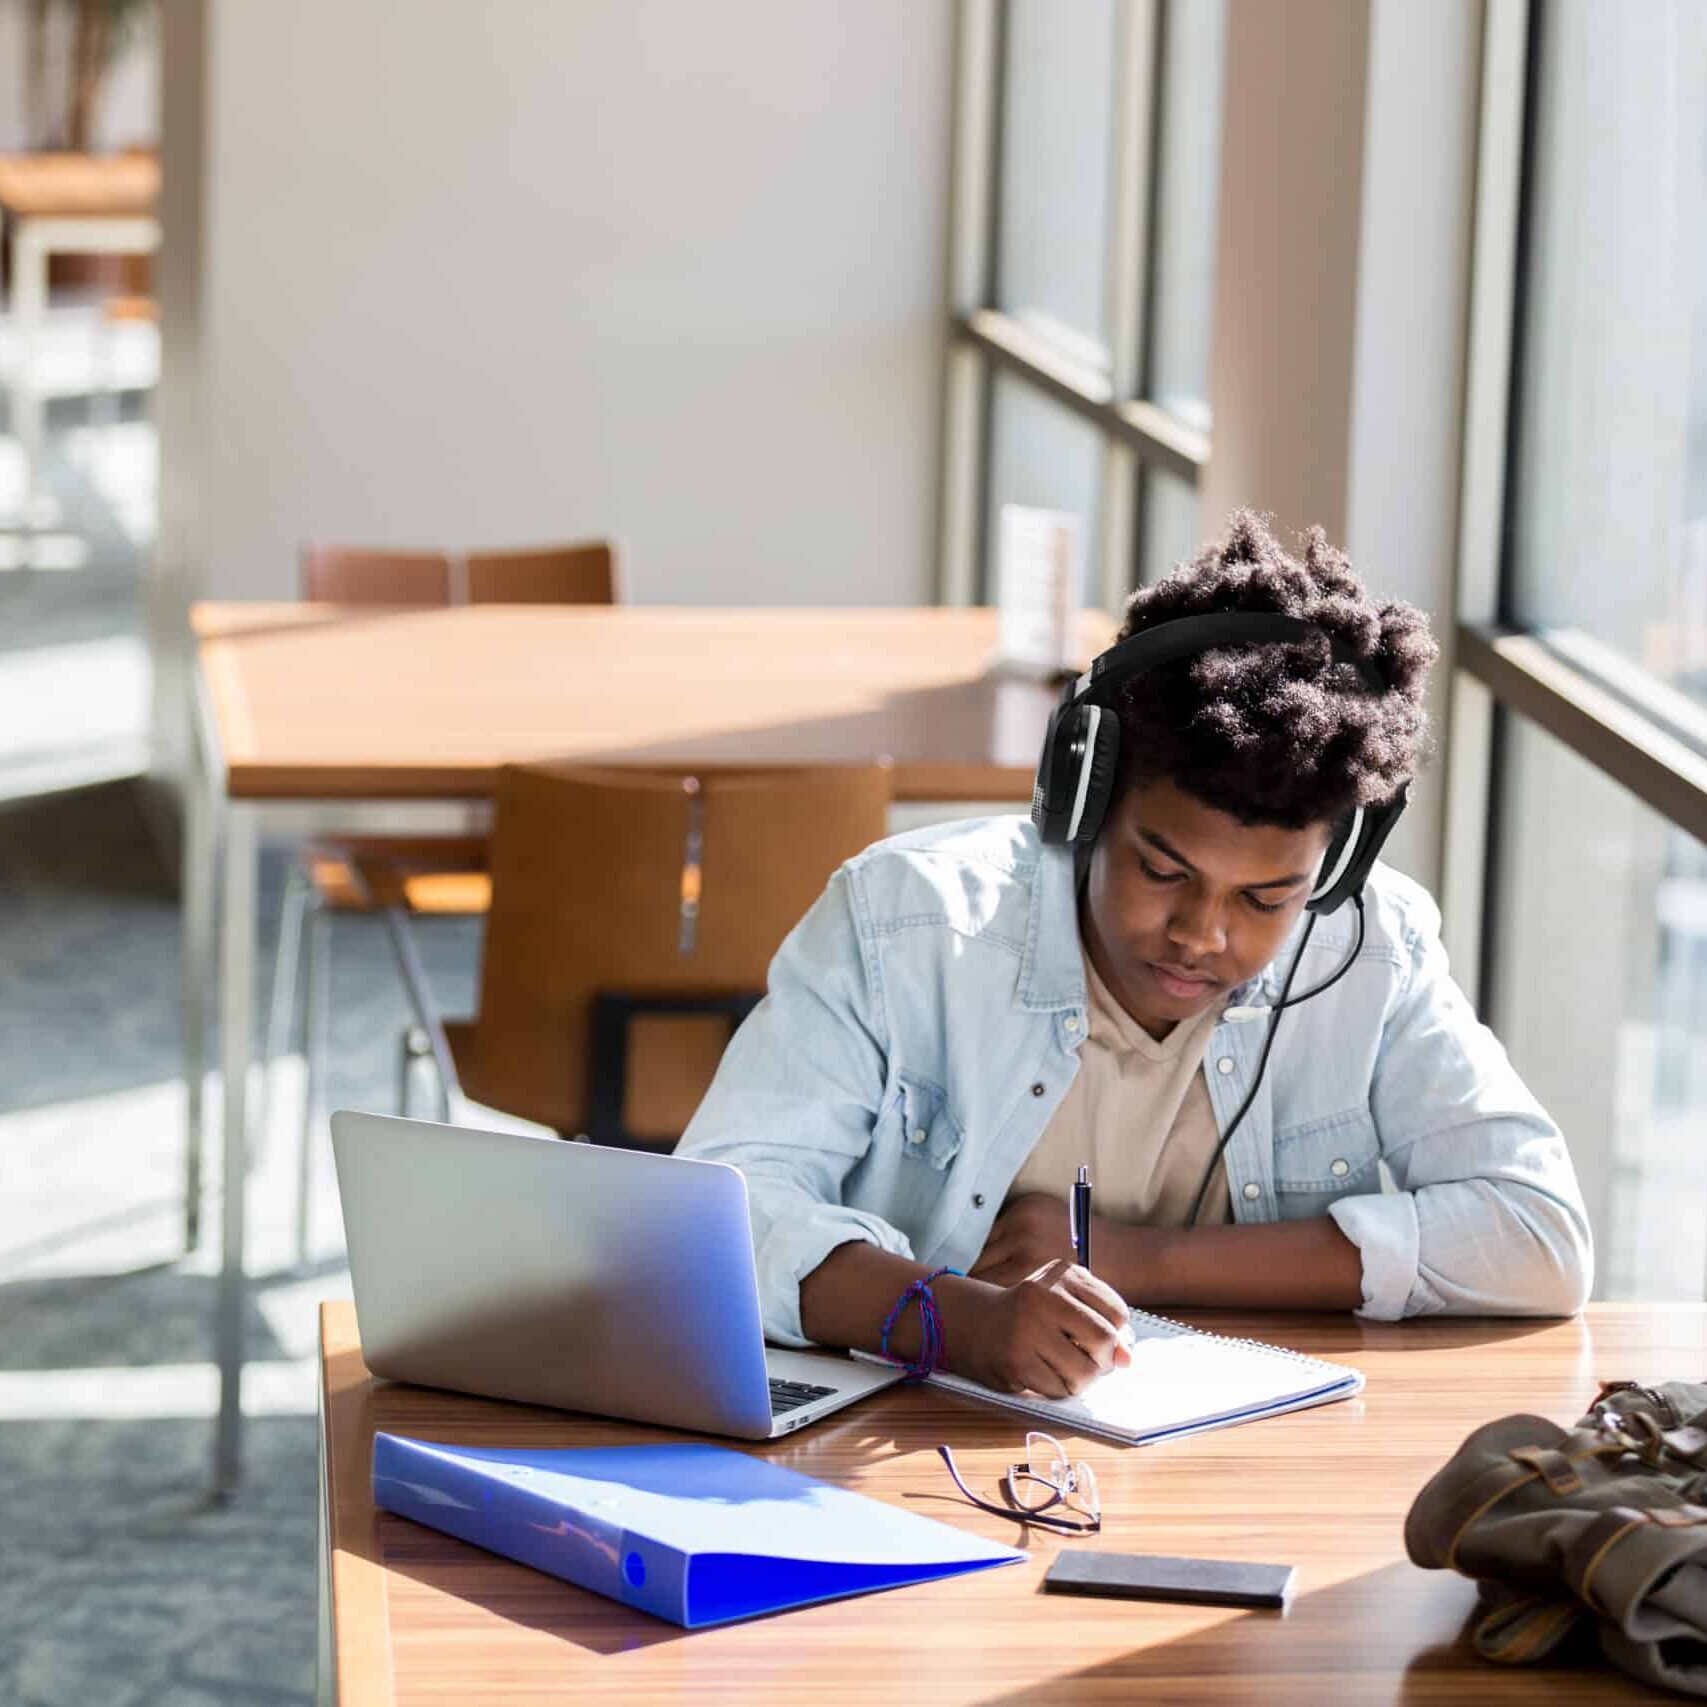 African American teenage boy writes something in a notebook while studying in the campus library. An open laptop is on the table. He is wearing wireless headphones.